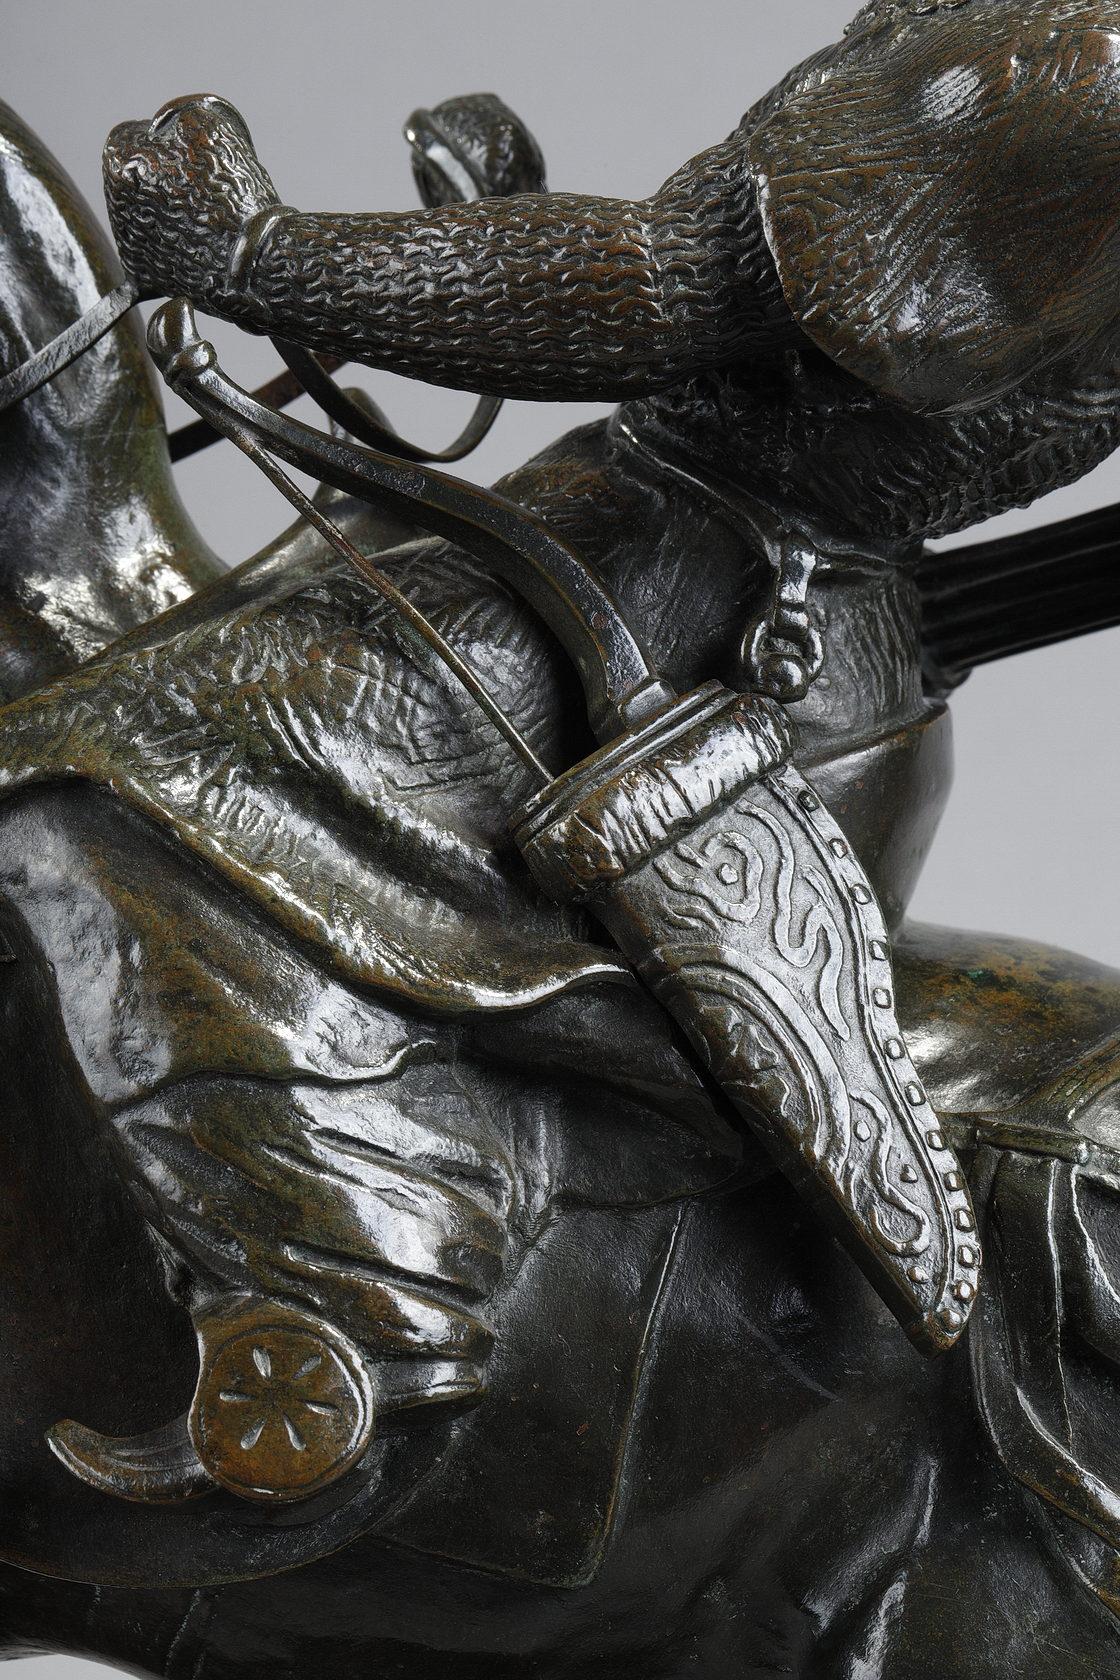 Tartar Warrior stopping his Horse, bronze sculpture For Sale 8